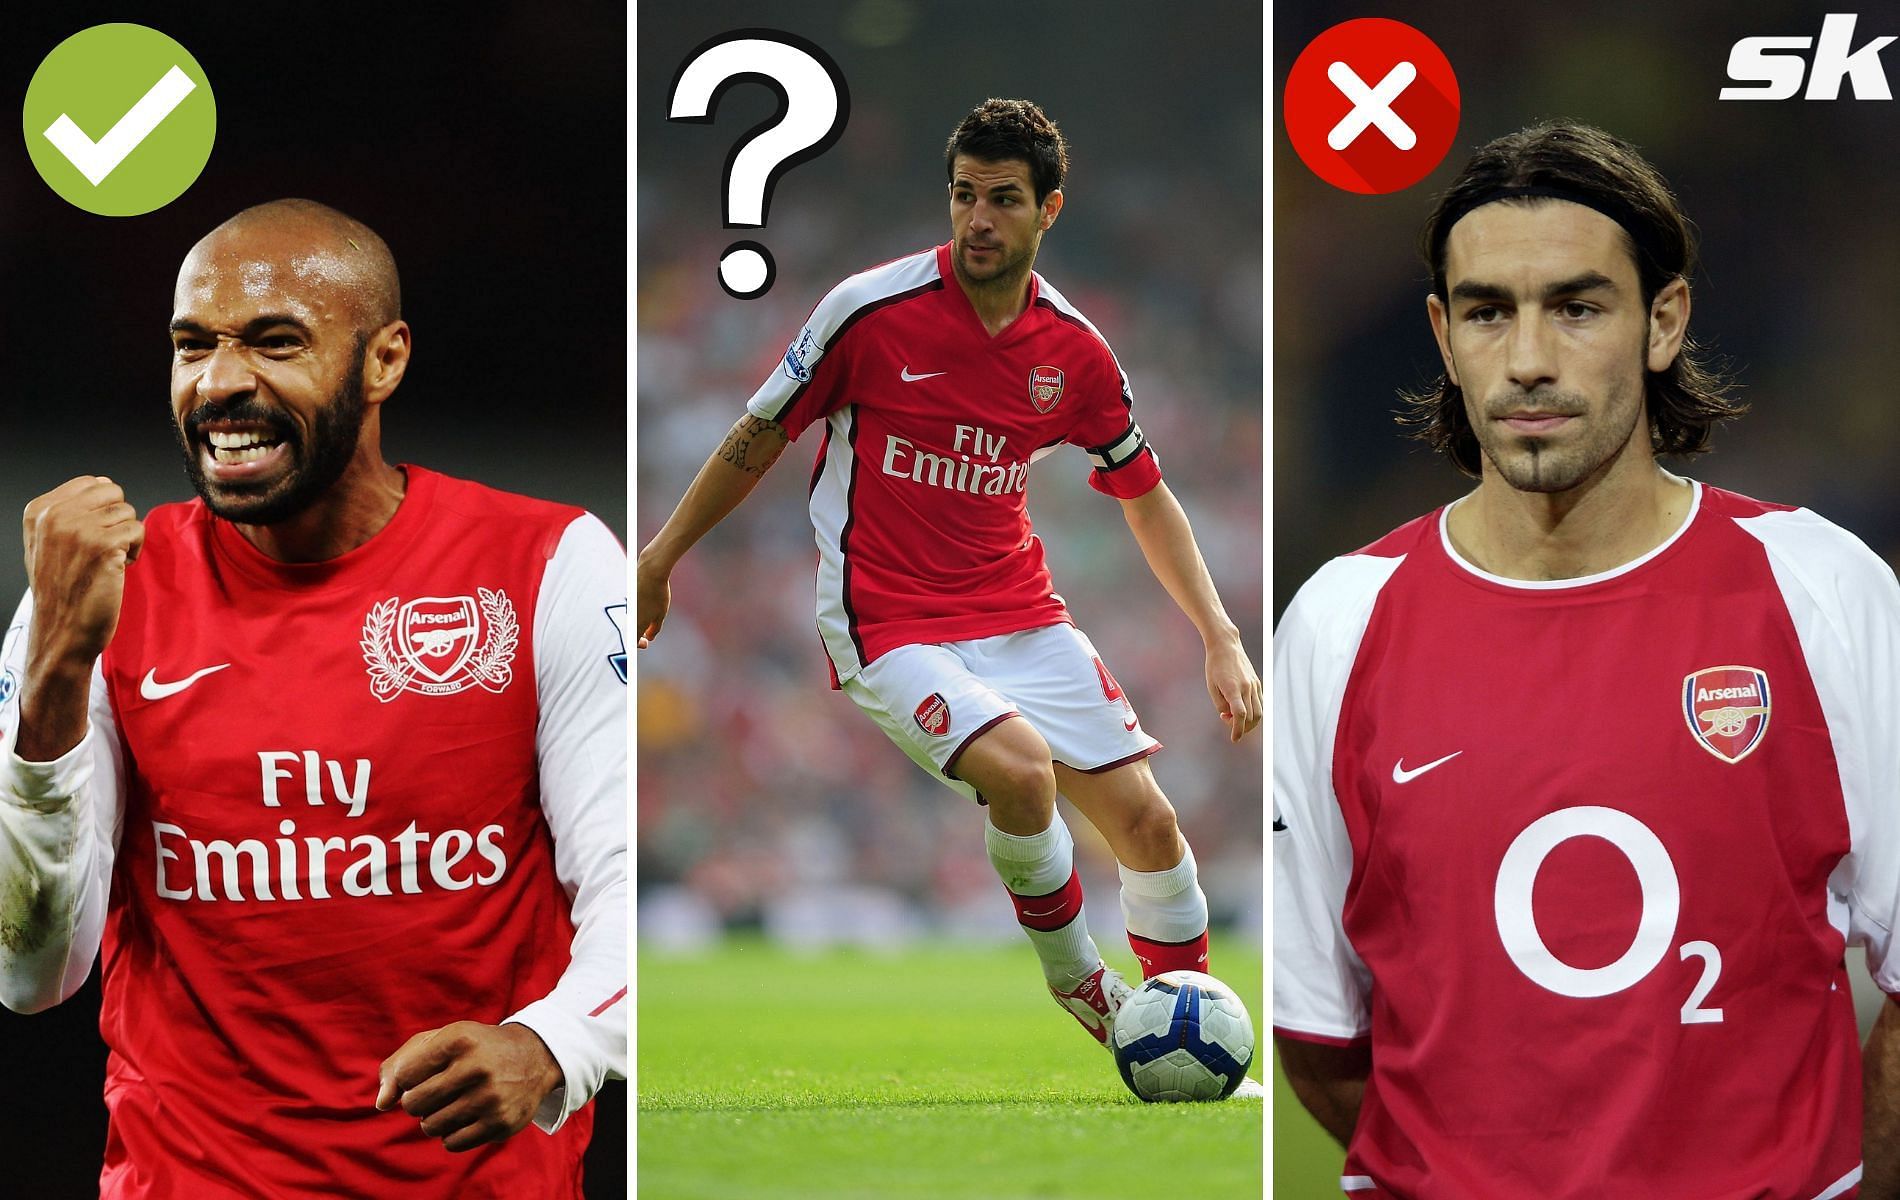 Some big names make it to the Arsenal foreign XI, while some miss out